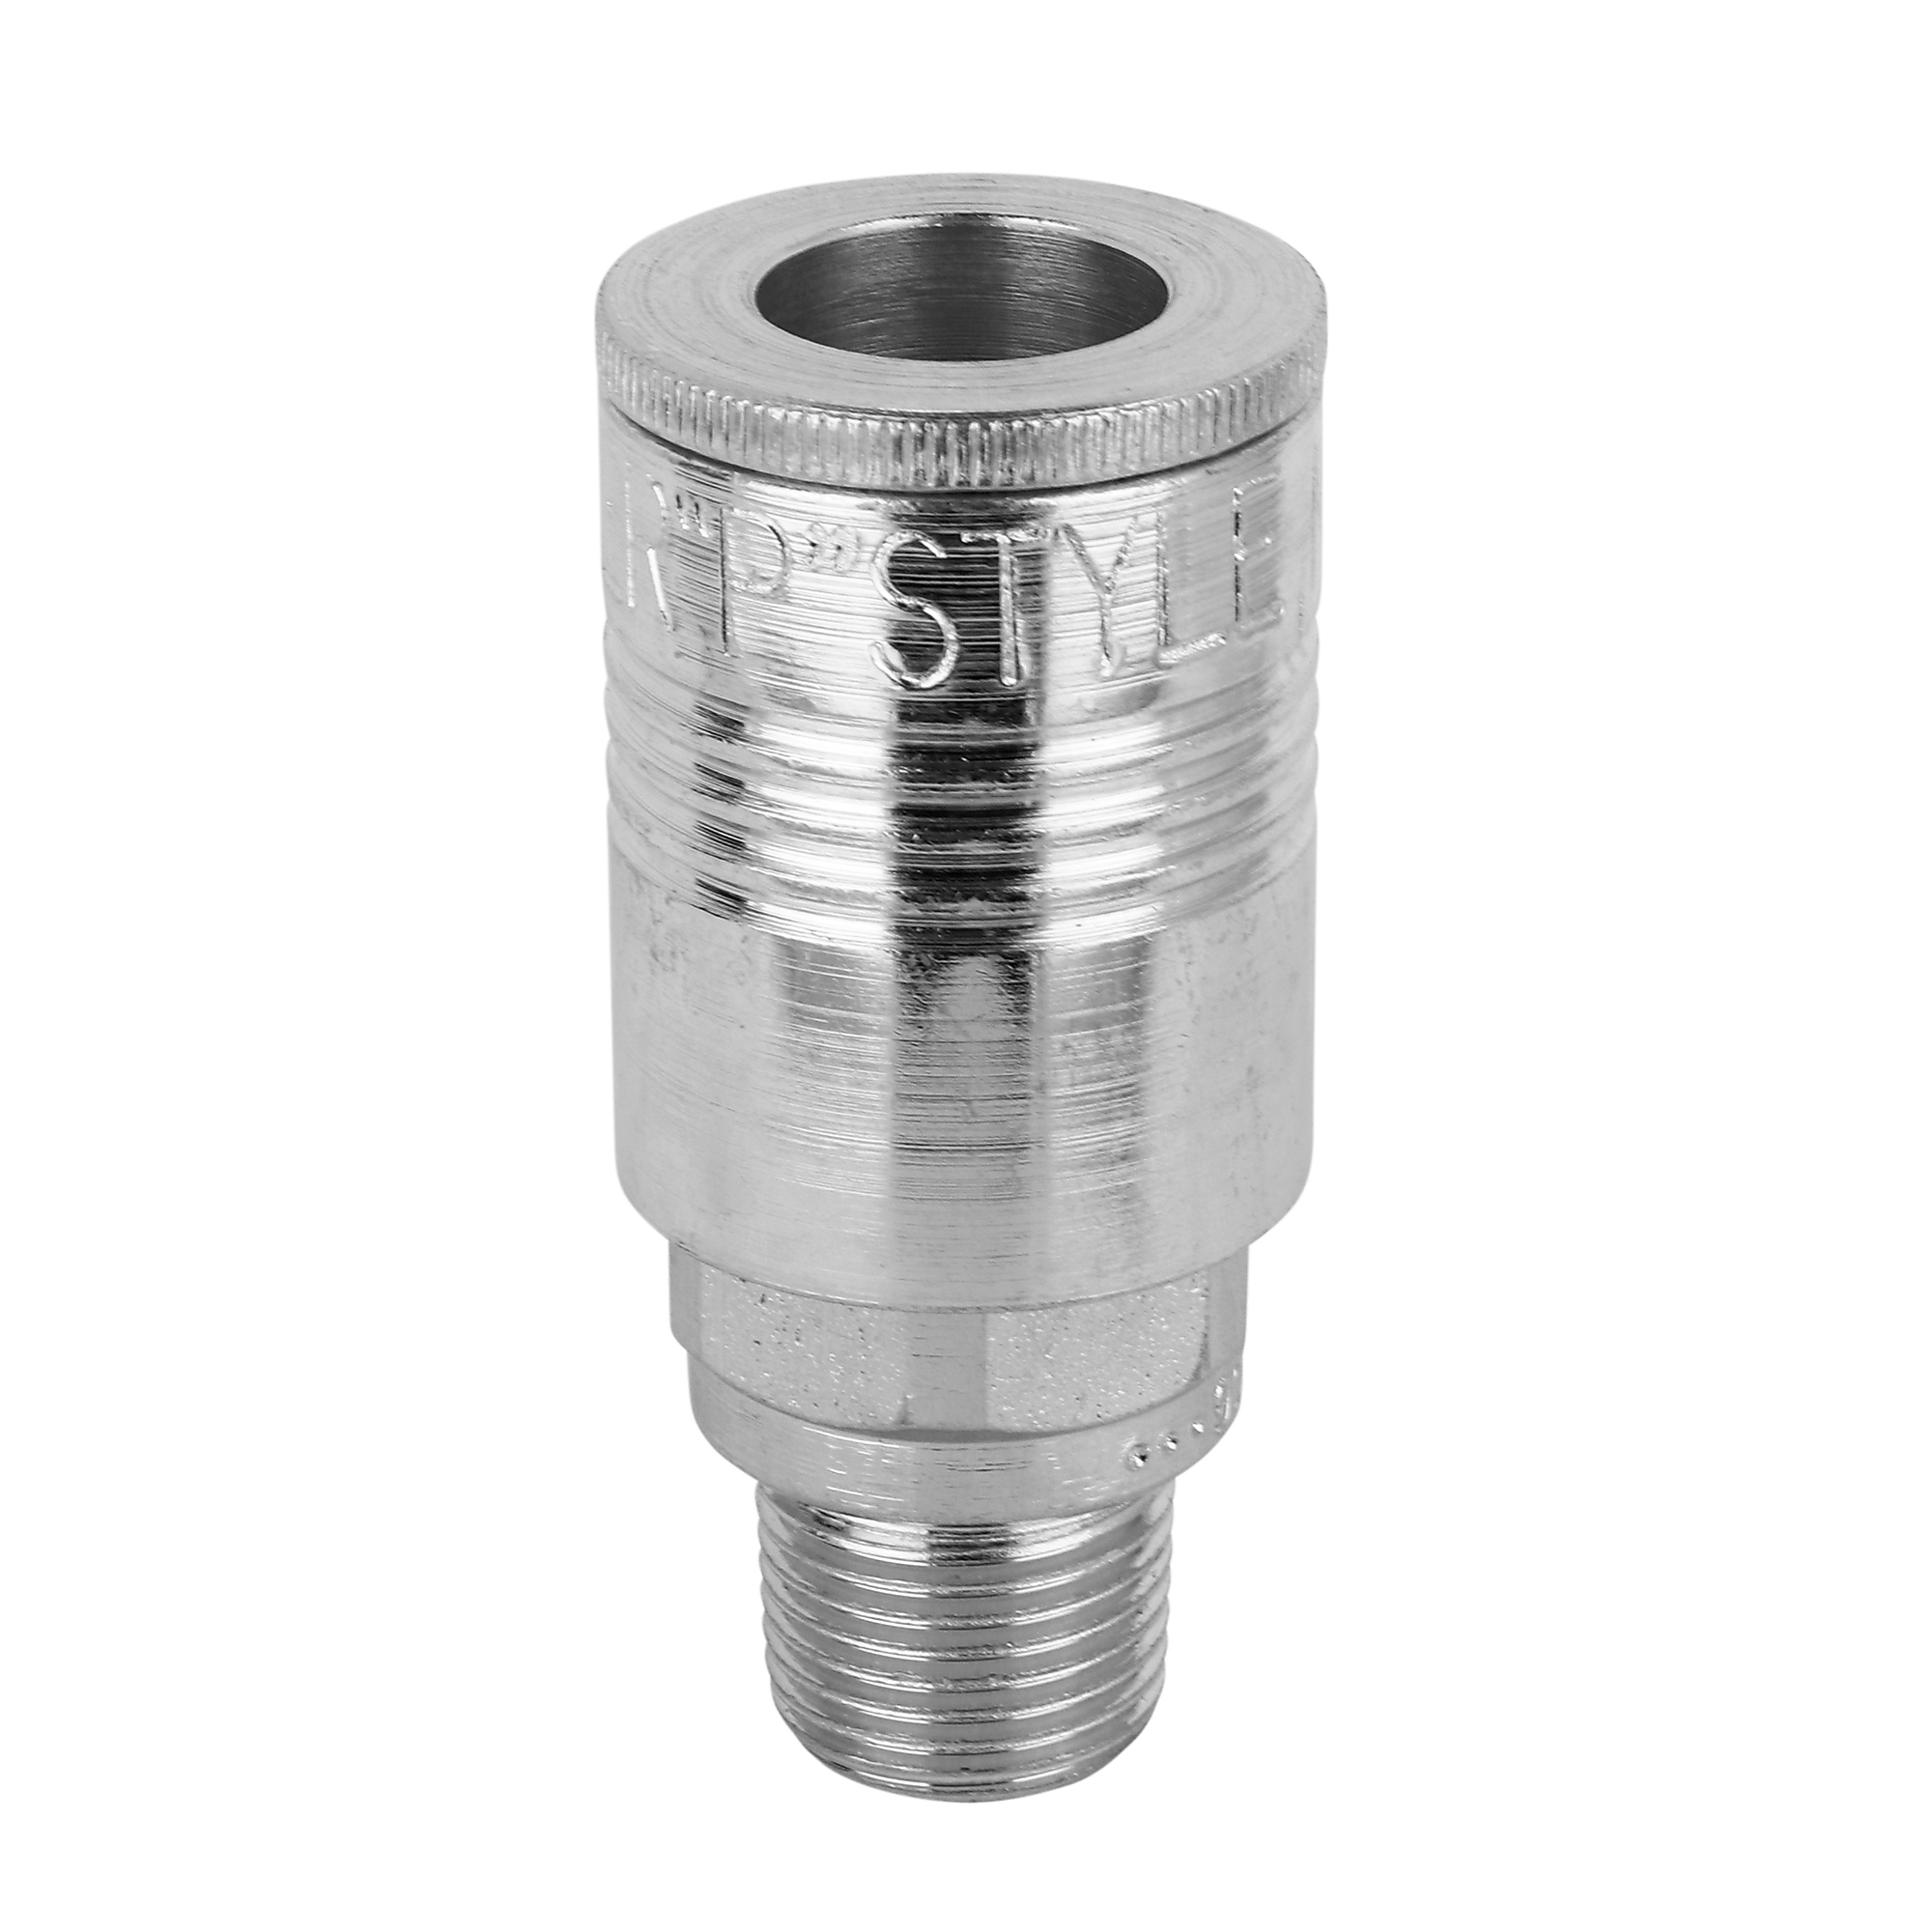 Milton, 3/8Inch Male Coupler P-Style, Coupler Size 3/8 in, Model s-1806